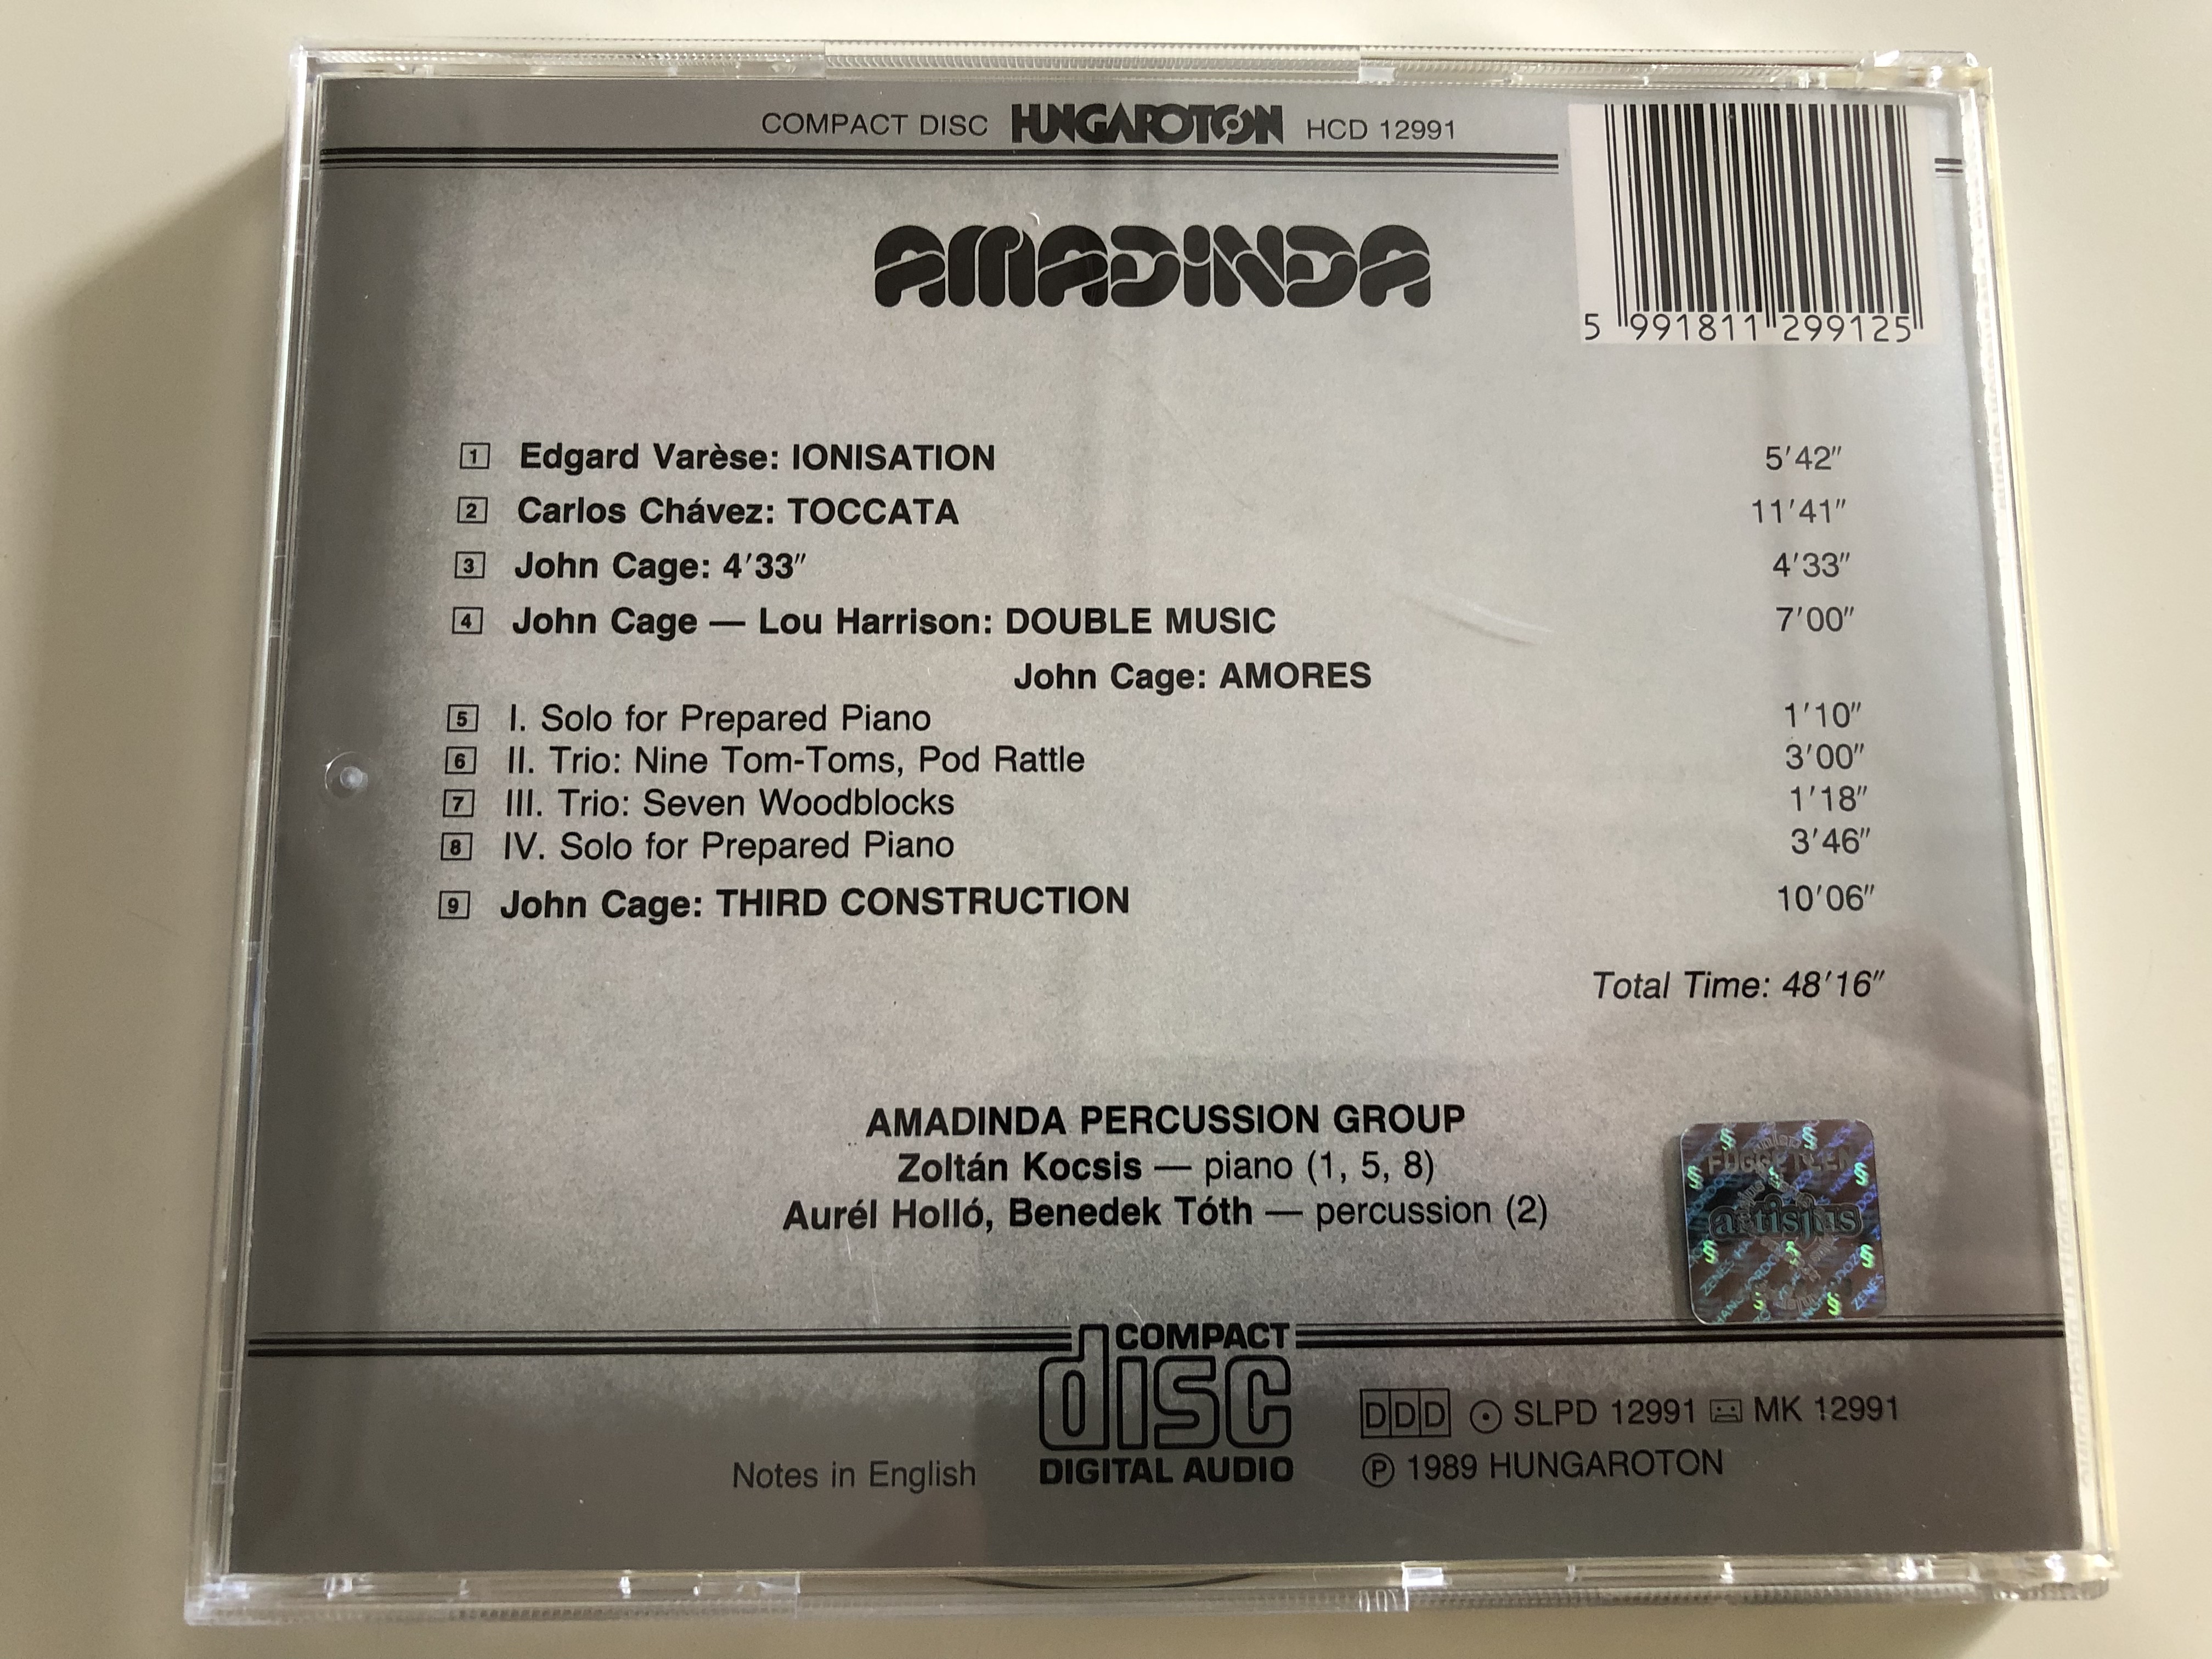 amadinda-percussion-group-works-by-var-se-ch-vez-cage-harrison-with-zolt-n-kocsis-piano-aur-l-holl-benedek-t-th-percussion-hungaroton-hcd-12991-audio-cd-1989-6-.jpg